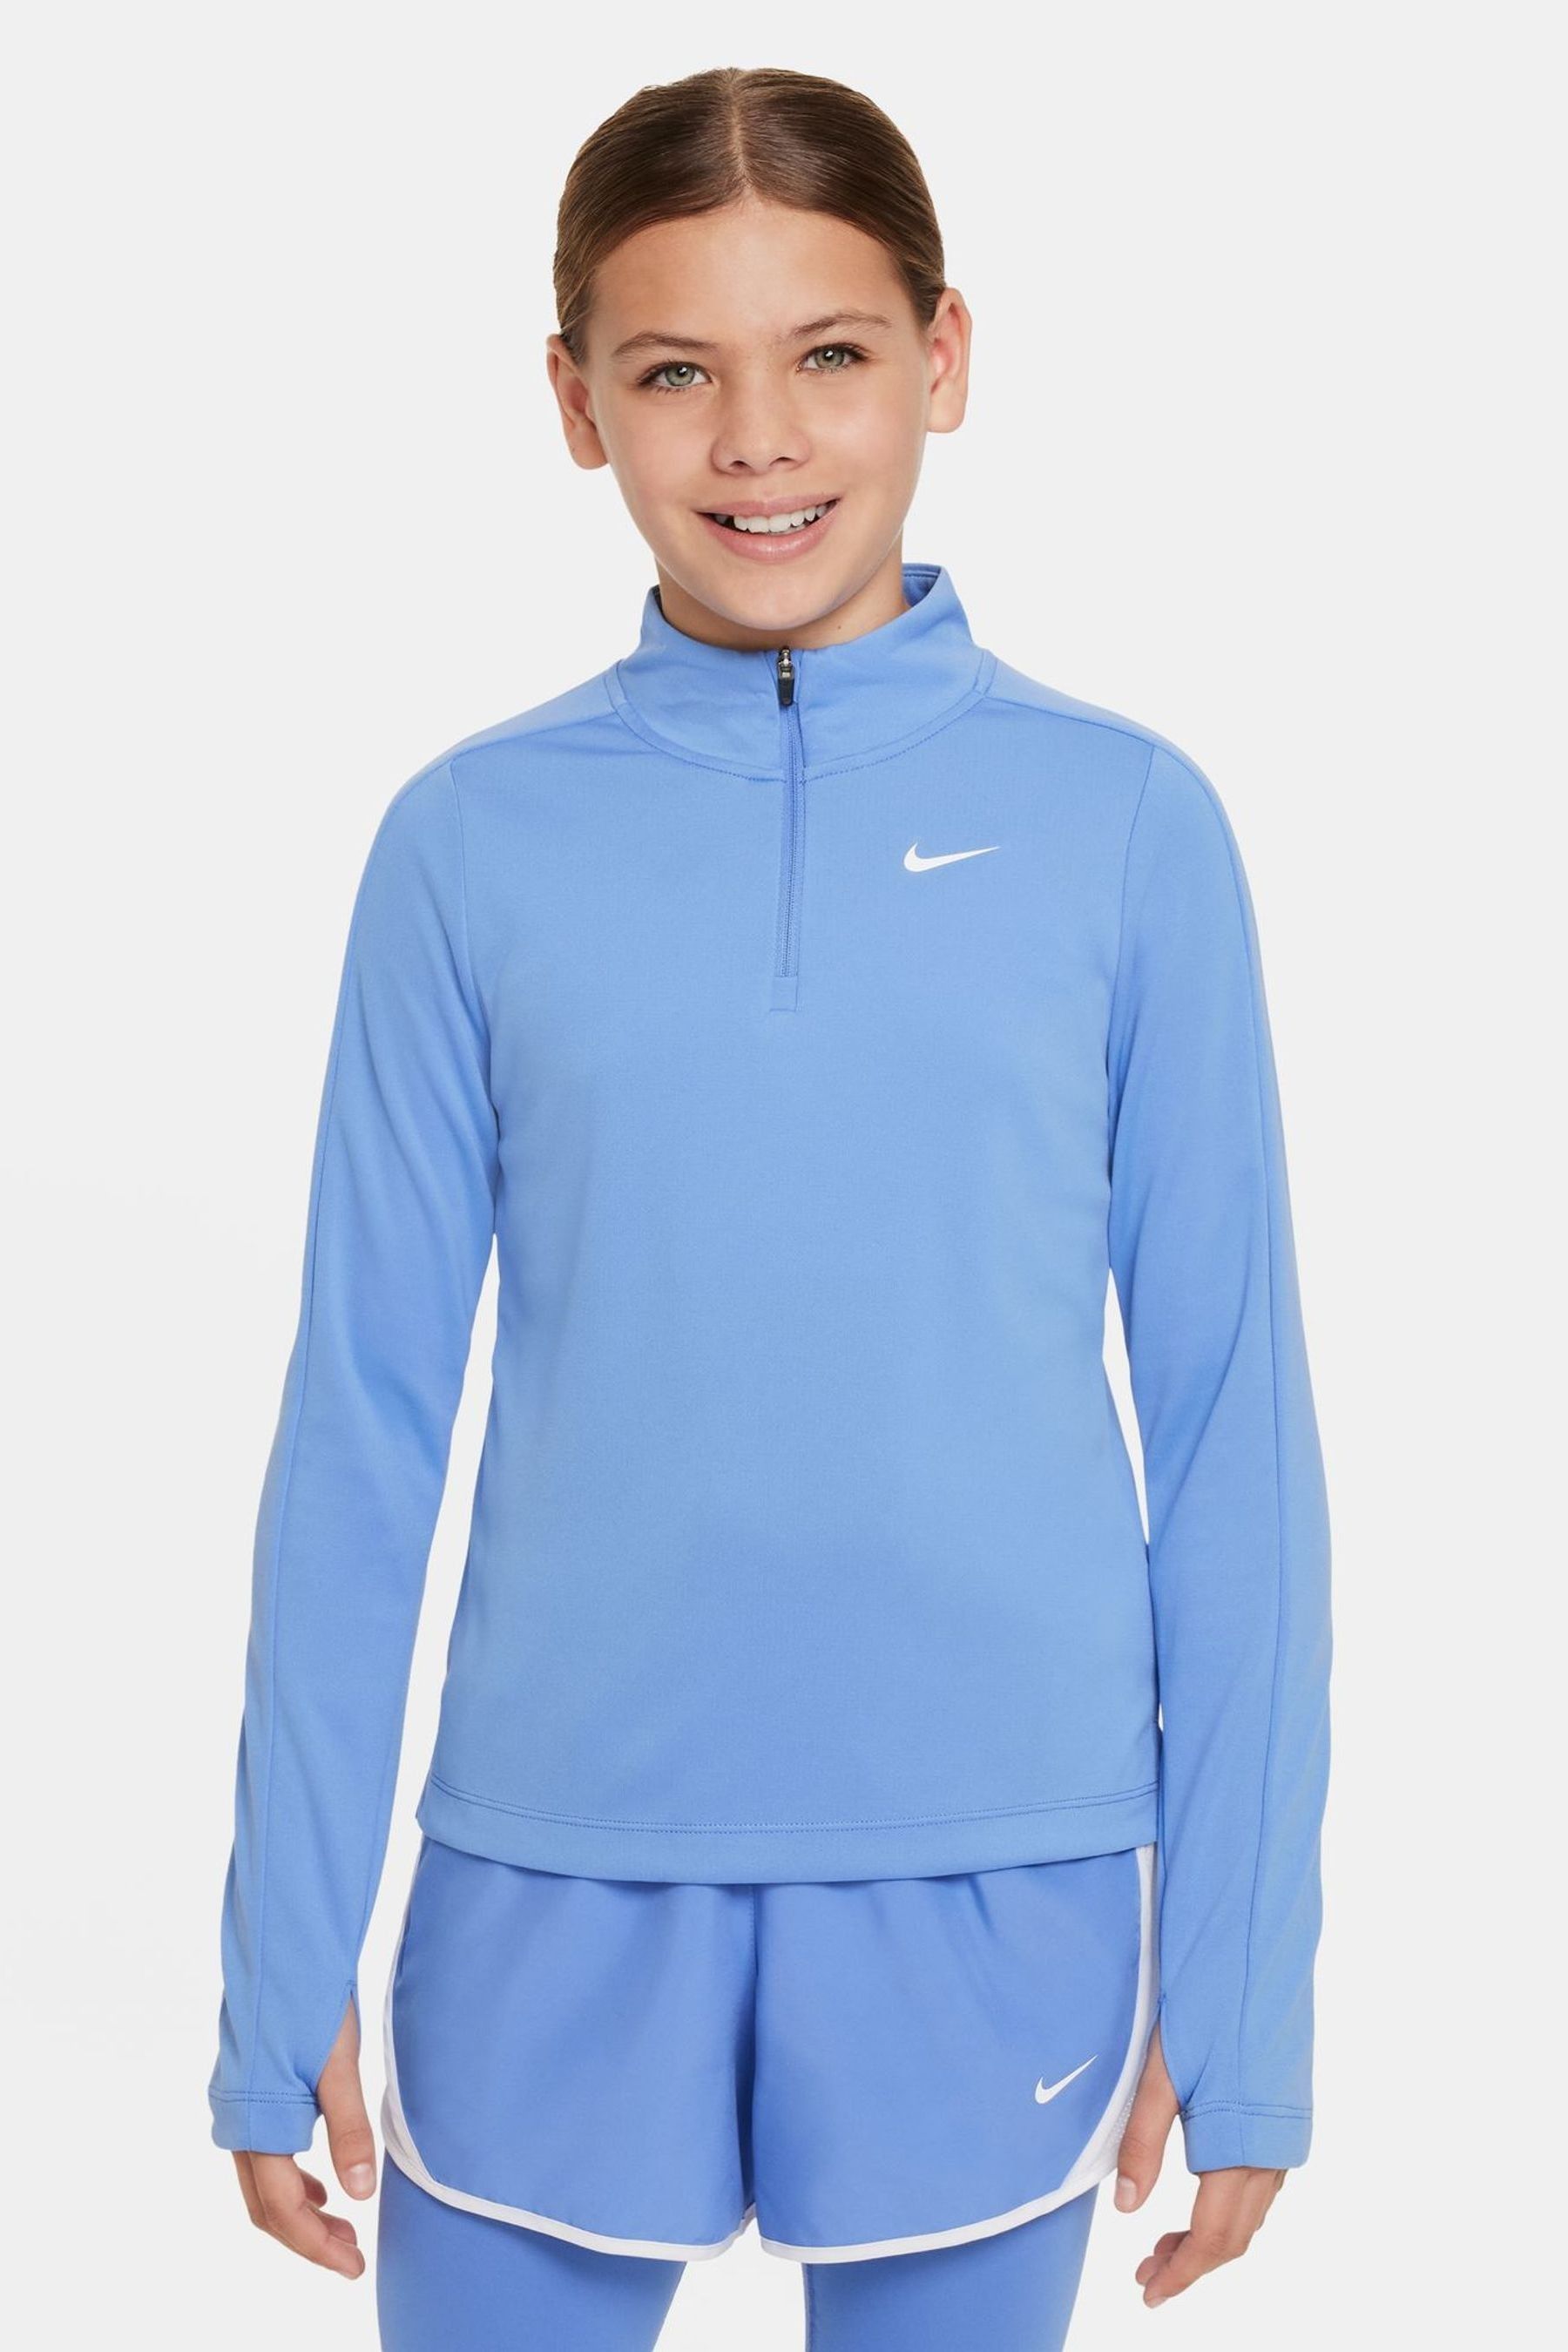 Buy Nike Blue Dri-FIT Half Zip Long Sleeve Running Sweat Top from the ...